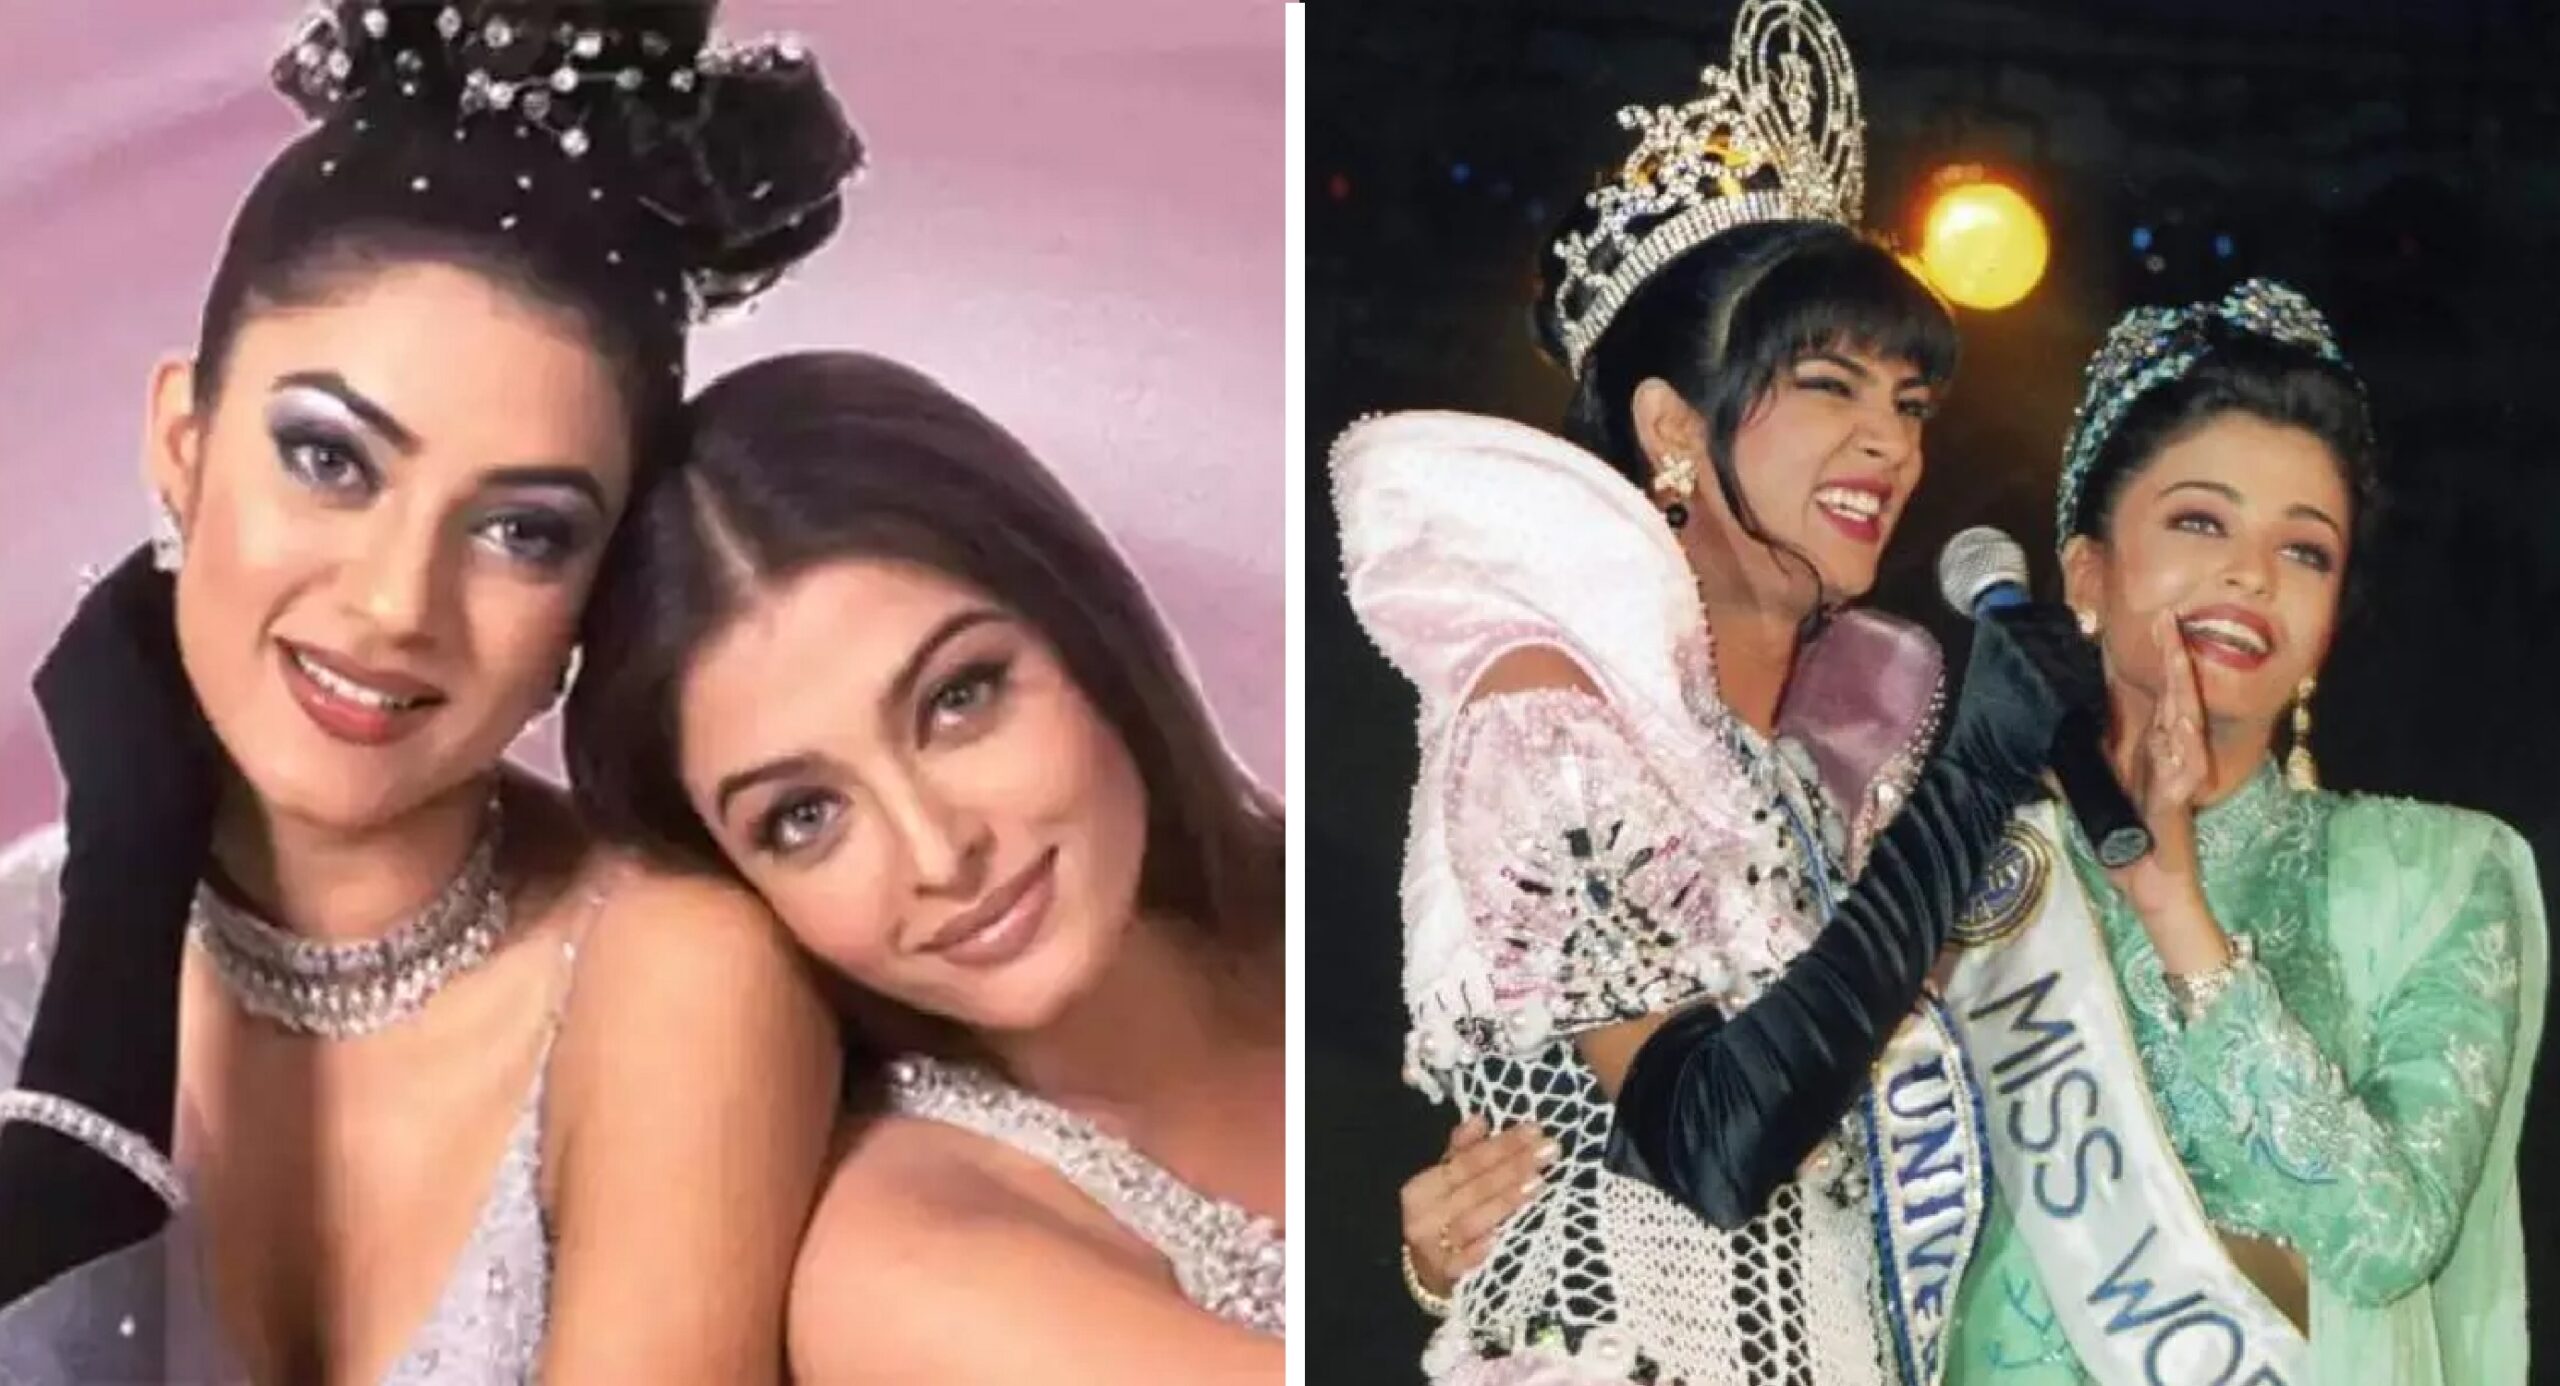 These Priceless Pictures Of Aishwarya Rai & Sushmita Sen From Their Beauty Pageant Days Prove They Are The OG Beauty Queens